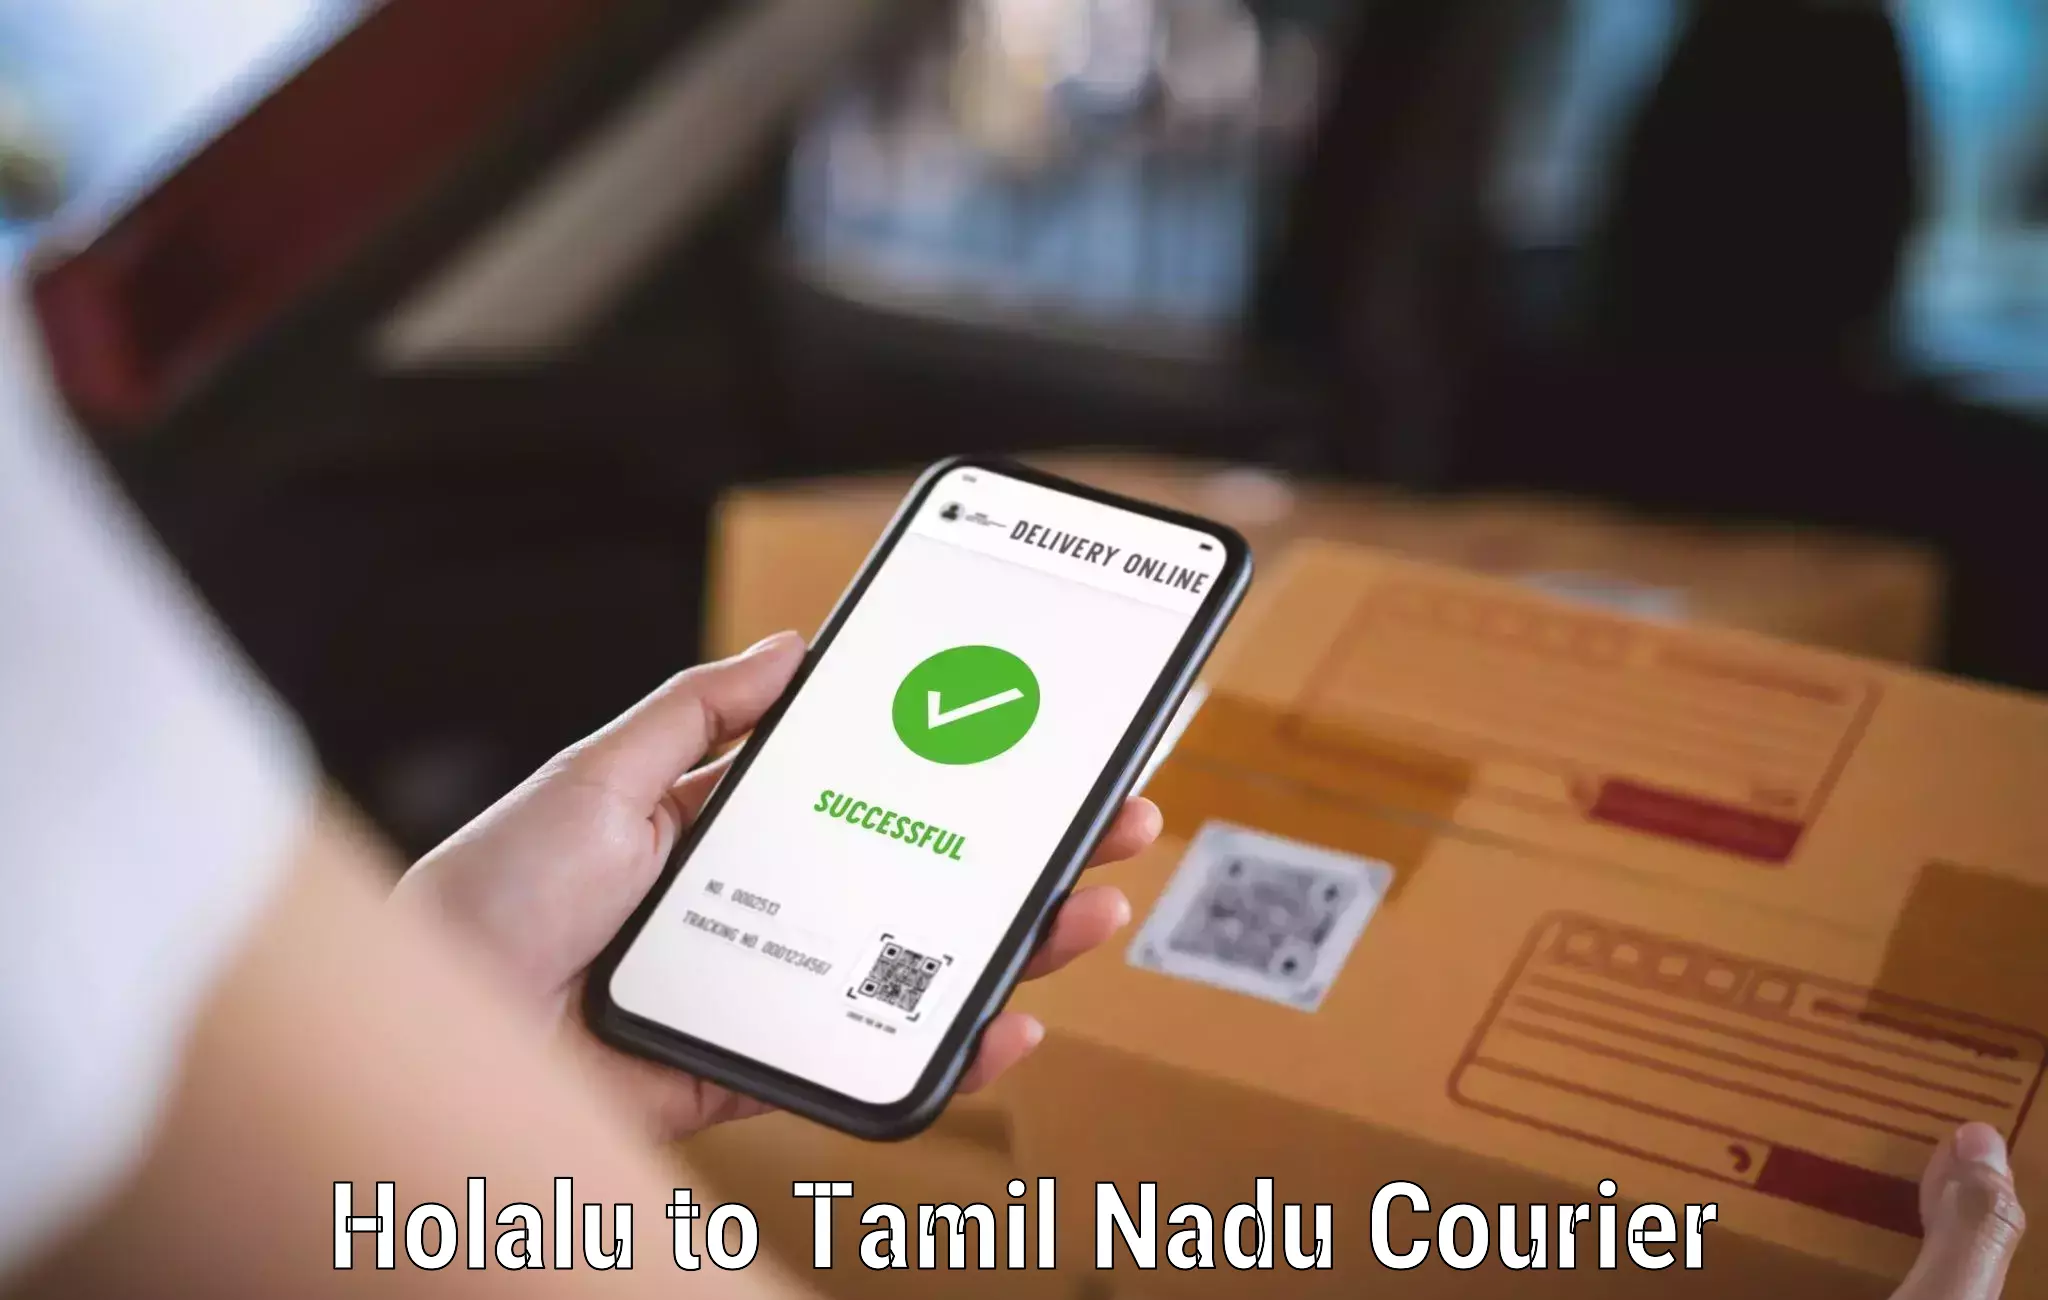 24-hour courier service Holalu to Eral